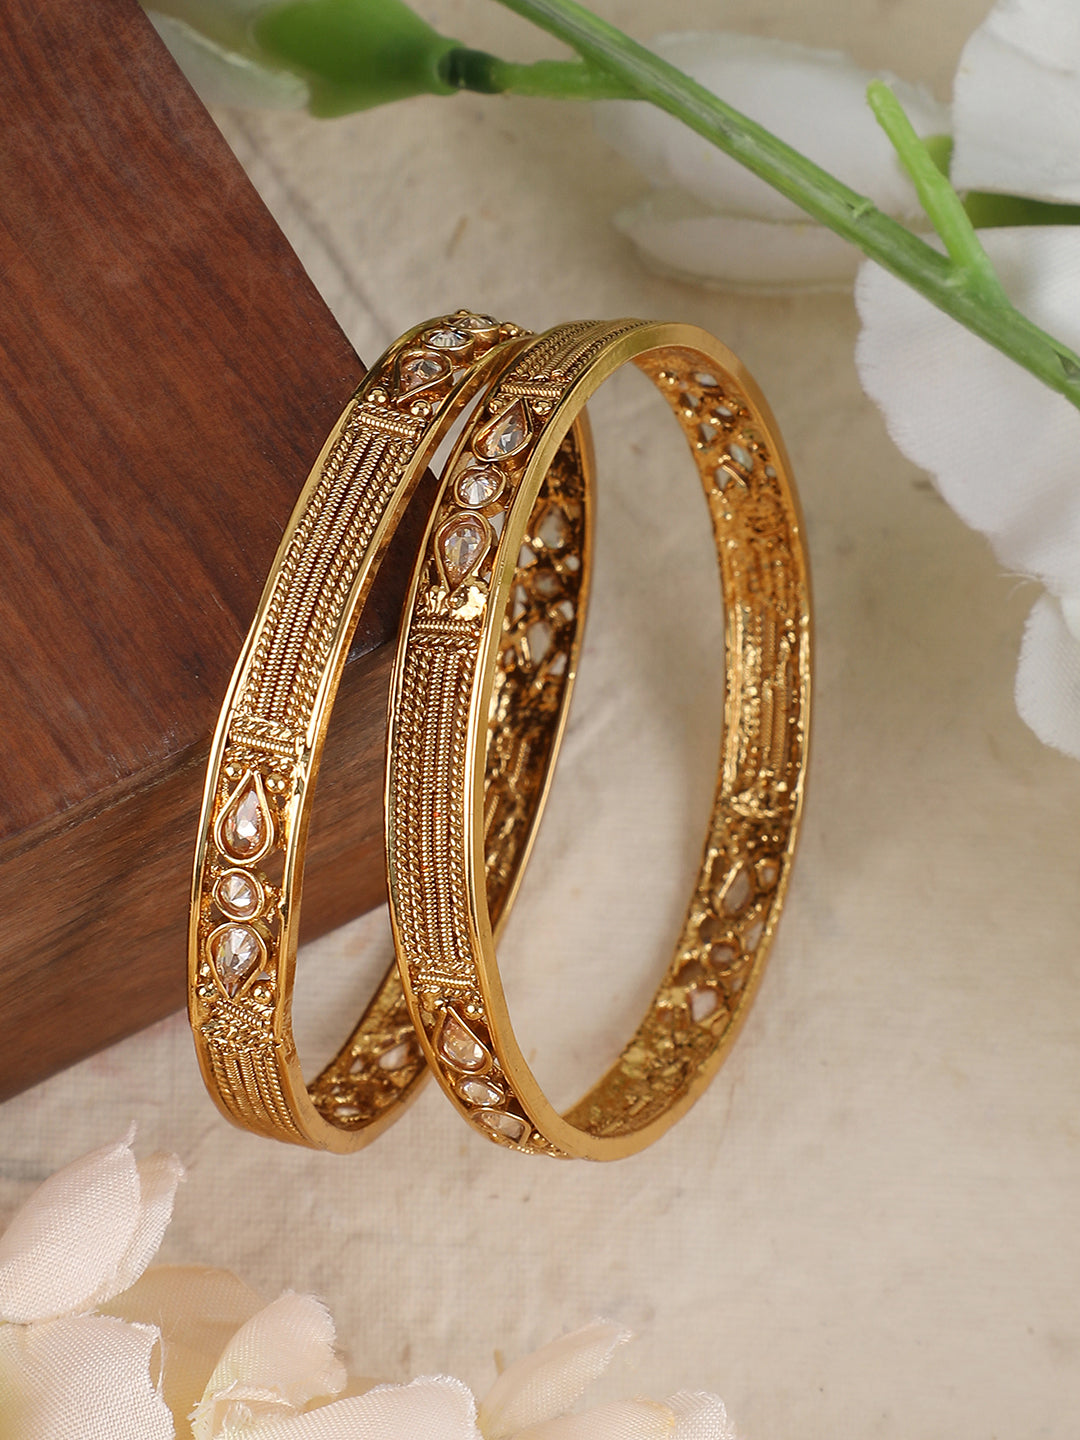 Women's Set Of 2 24K Gold-Plated Red & Green Stone-Studded Hand Crafted Bangles - Anikas Creation